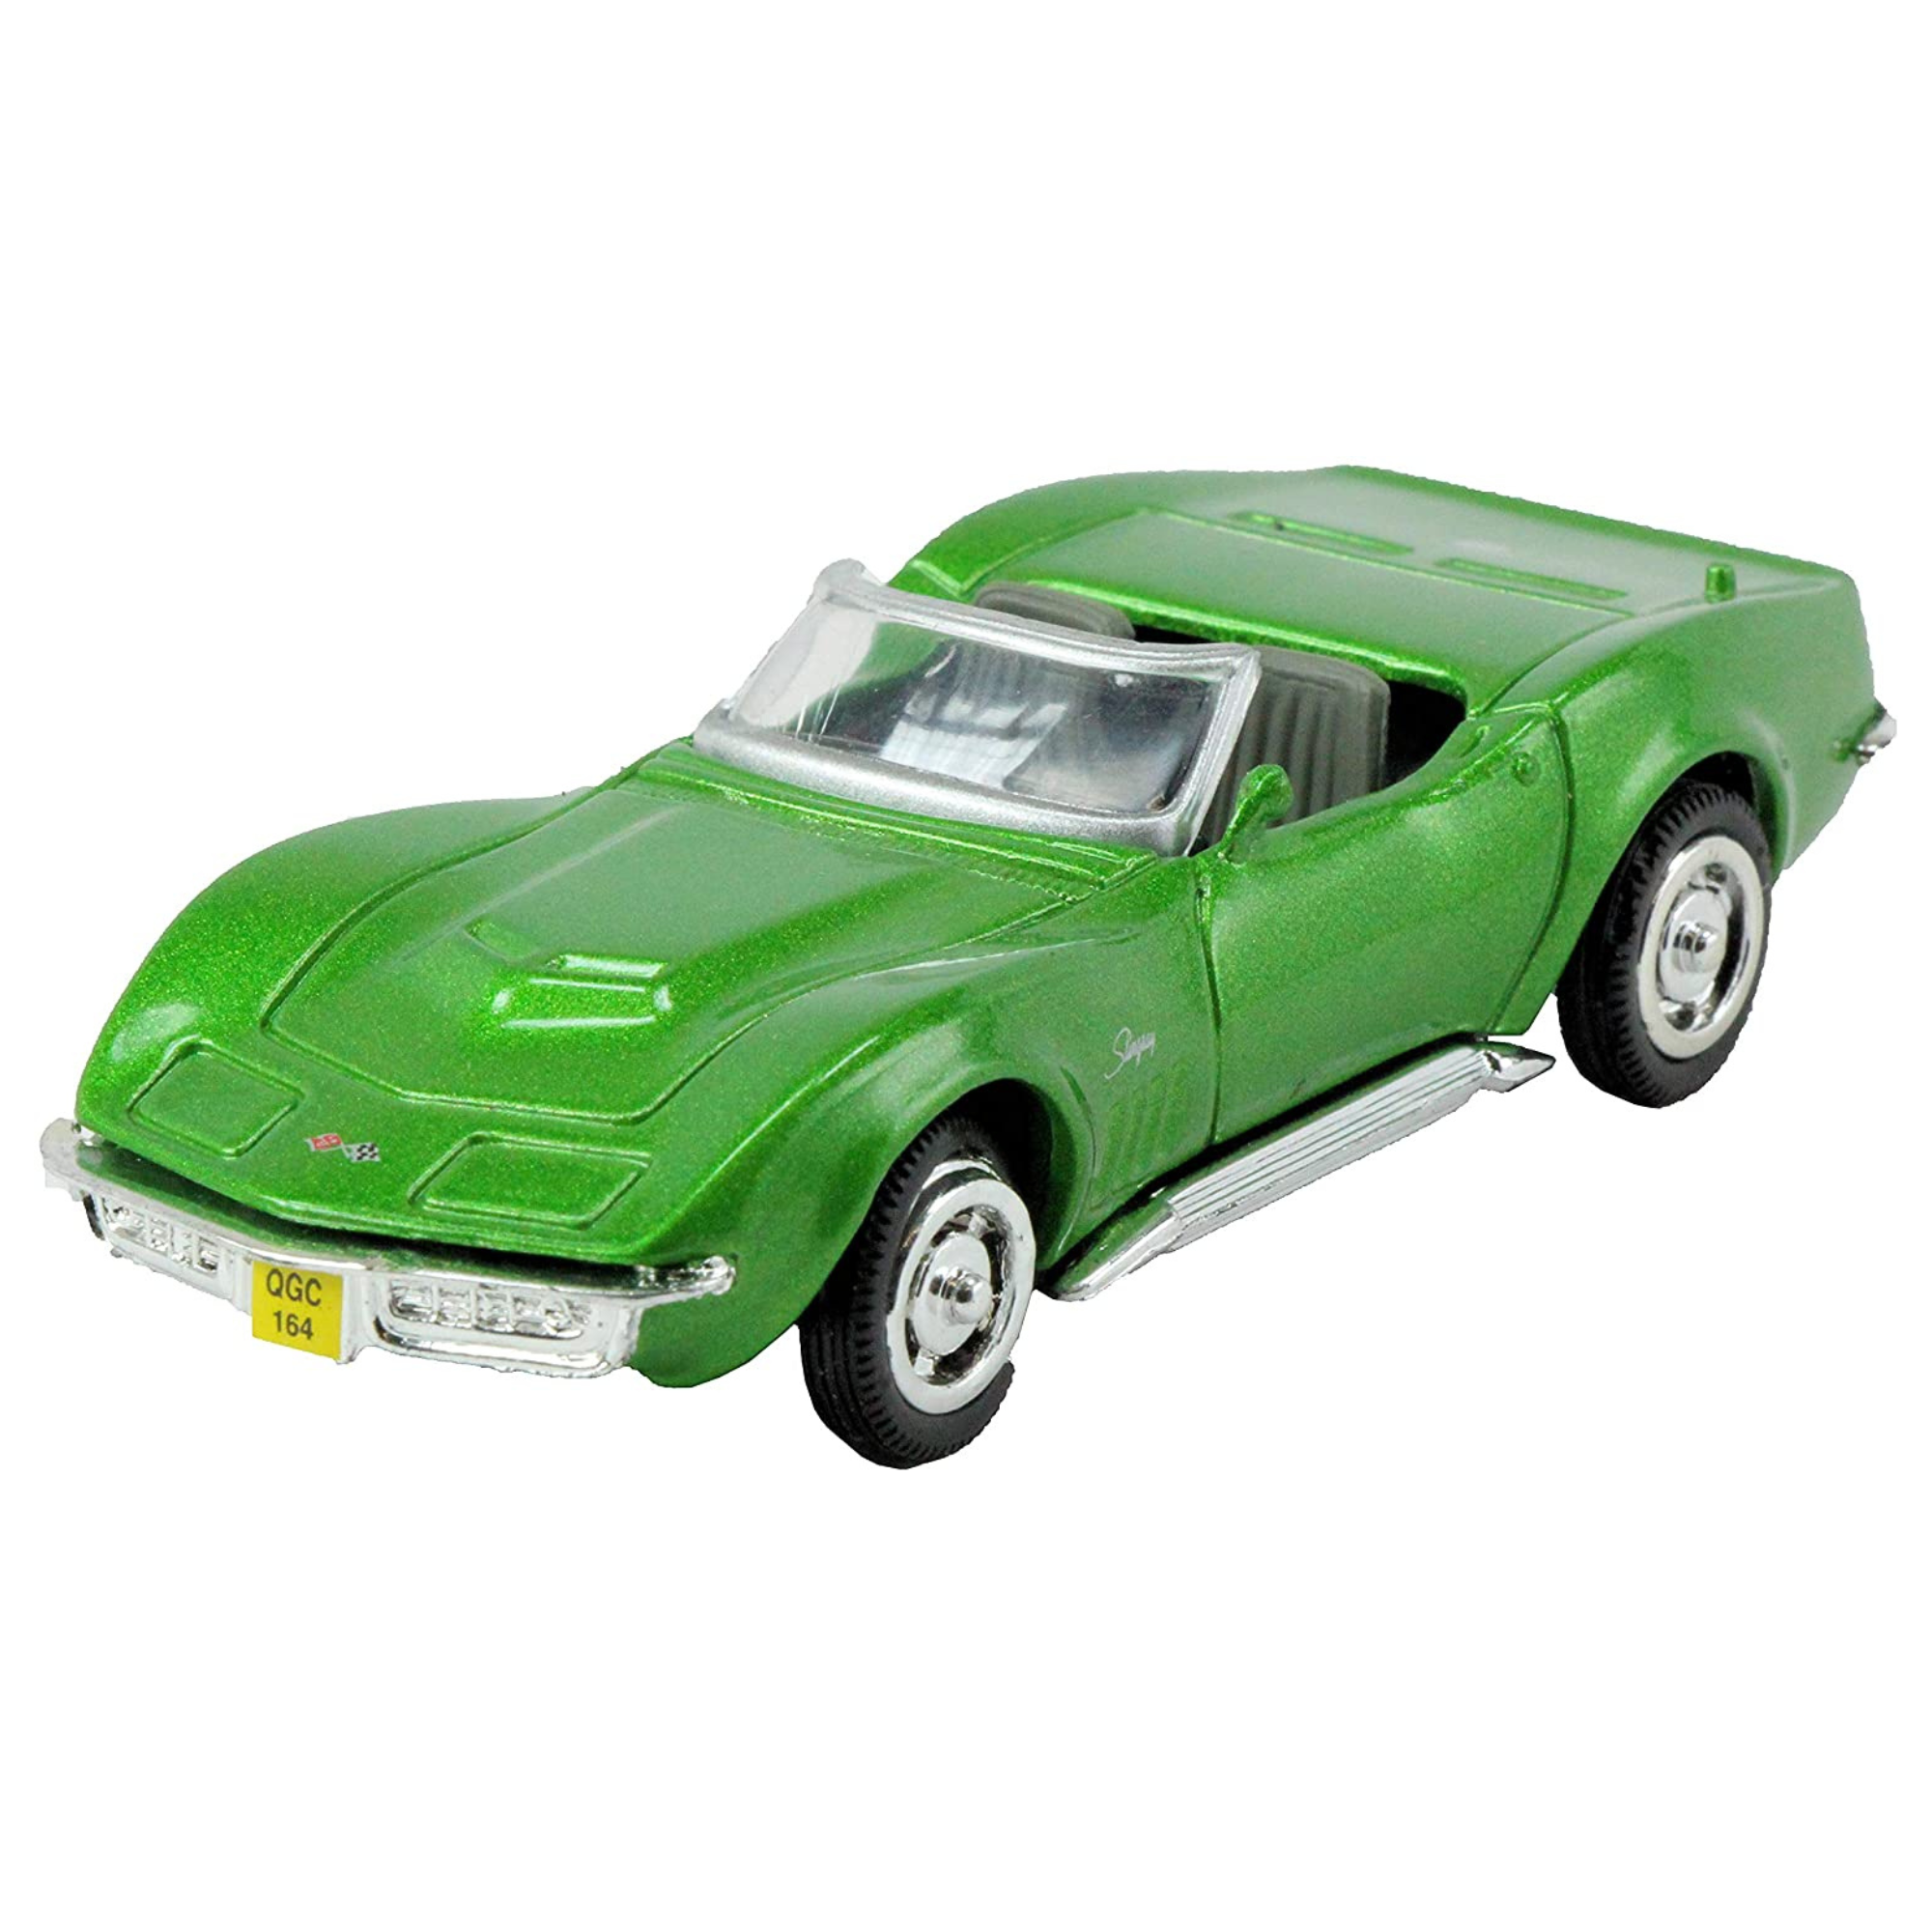 New Ray 1:43 Diecast 1969 Corvette Stingray Convertible In Green - All American City Cruiser Collection - Toptoys2u